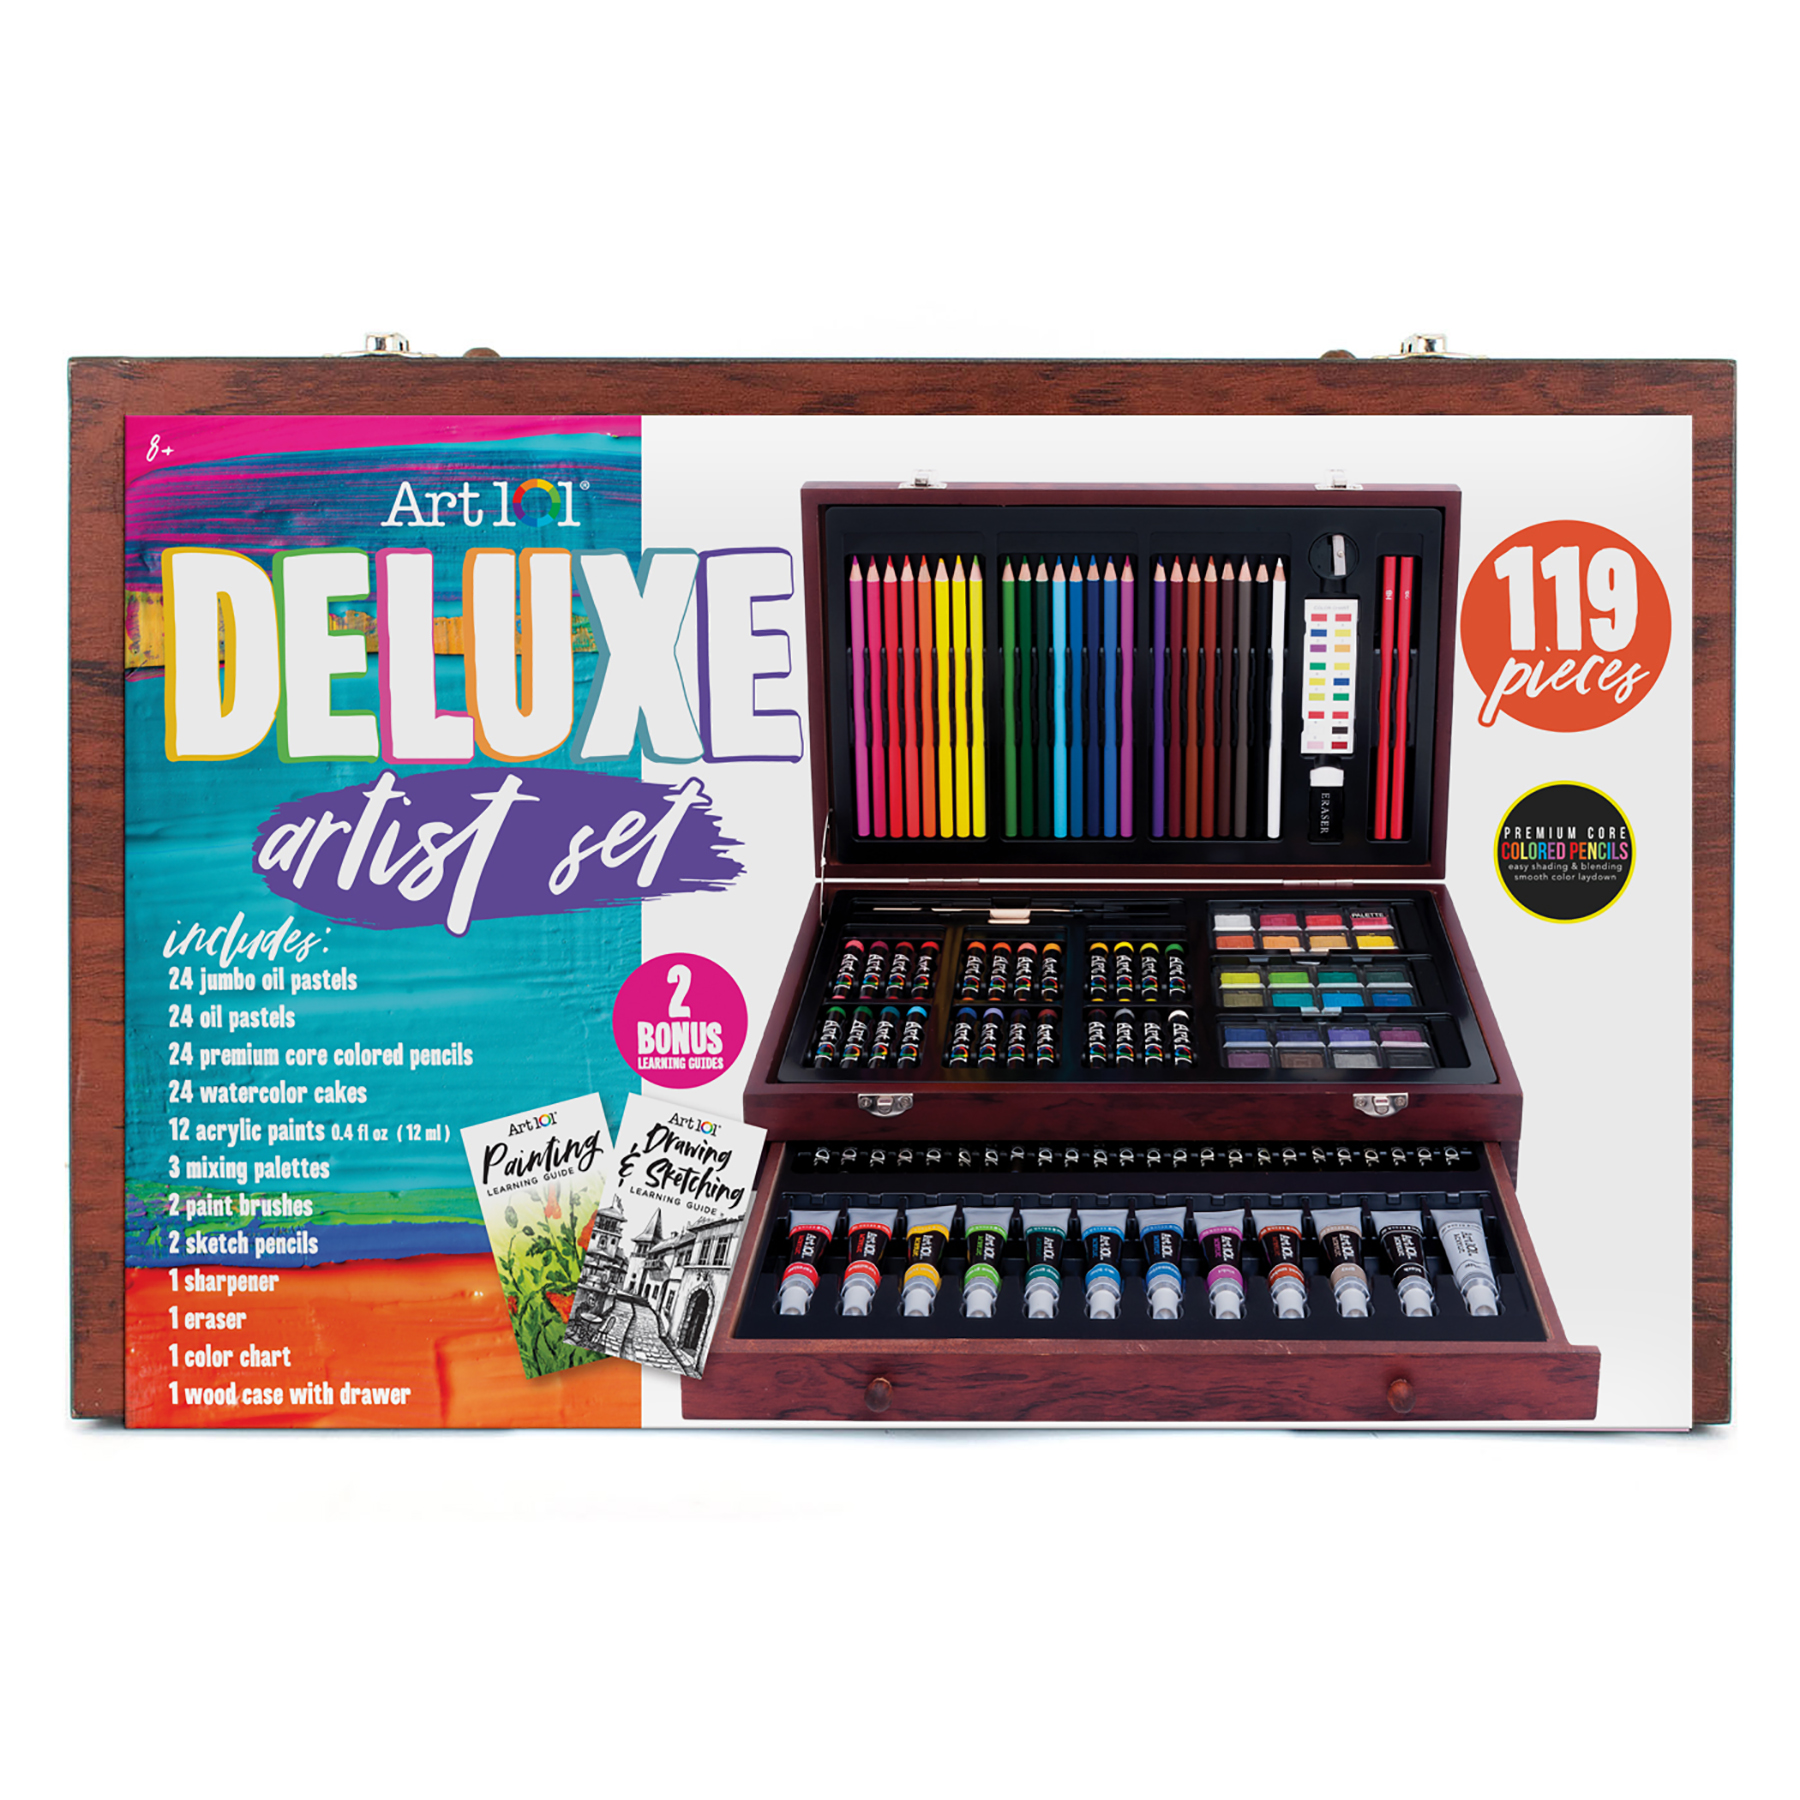 Art 101 Deluxe Art Set in a Wood Organizer Case, 119 Pieces